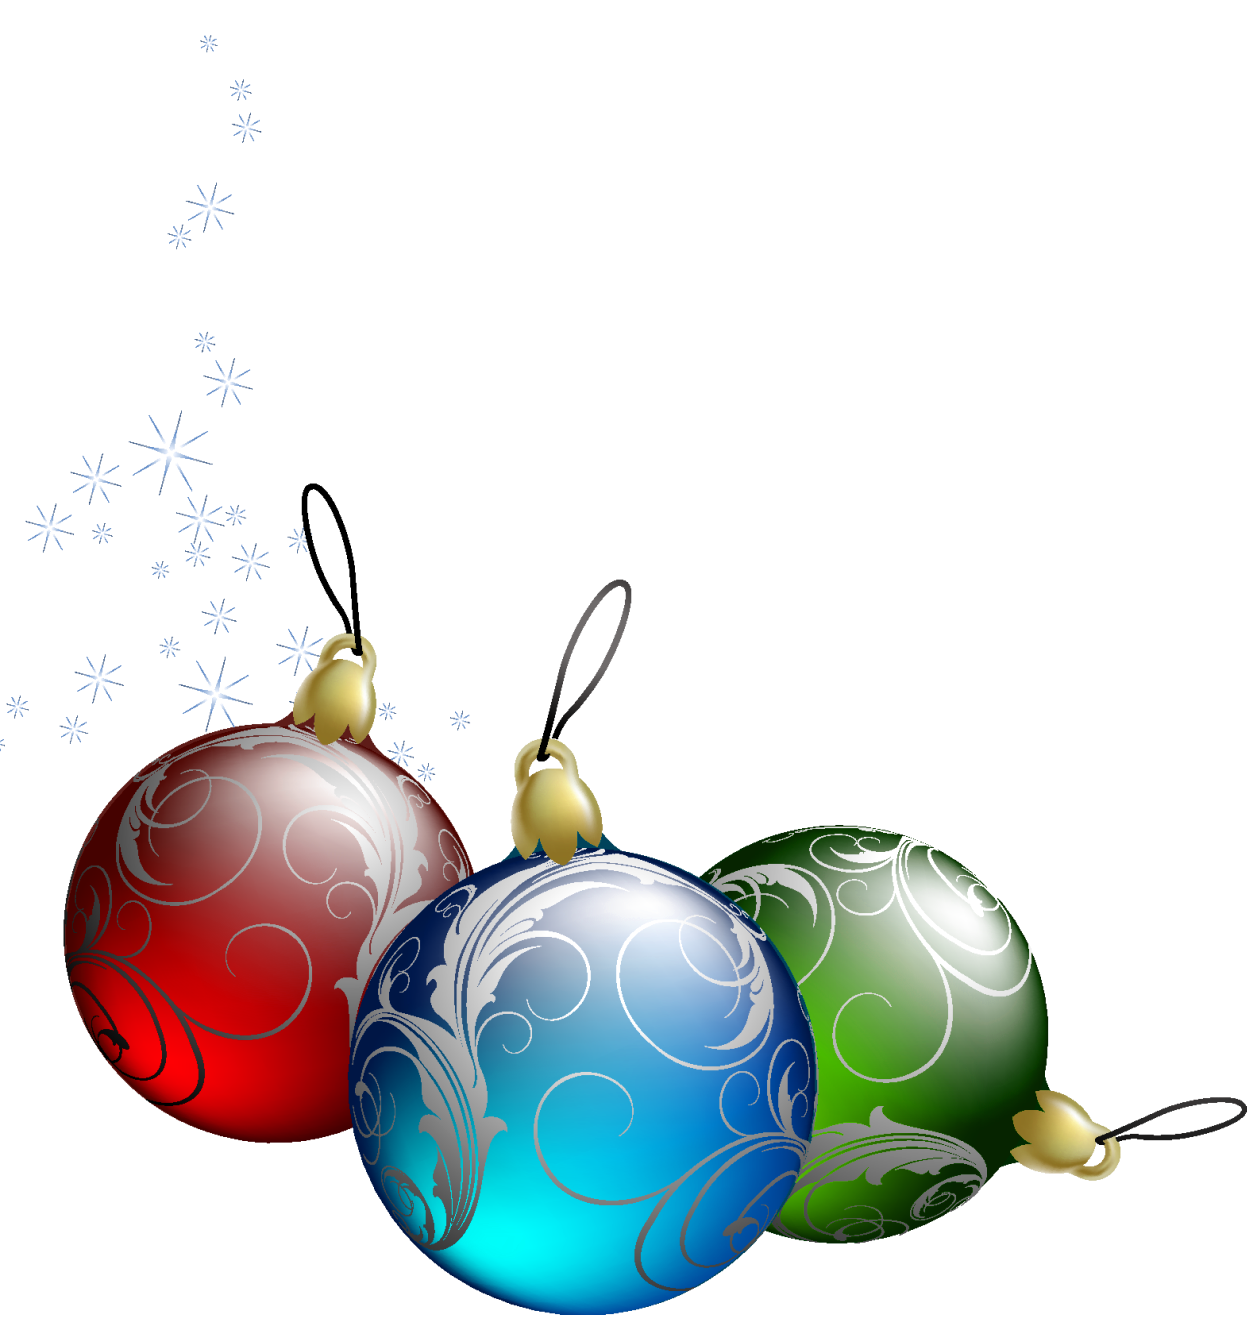 decoration clipart holiday ornament